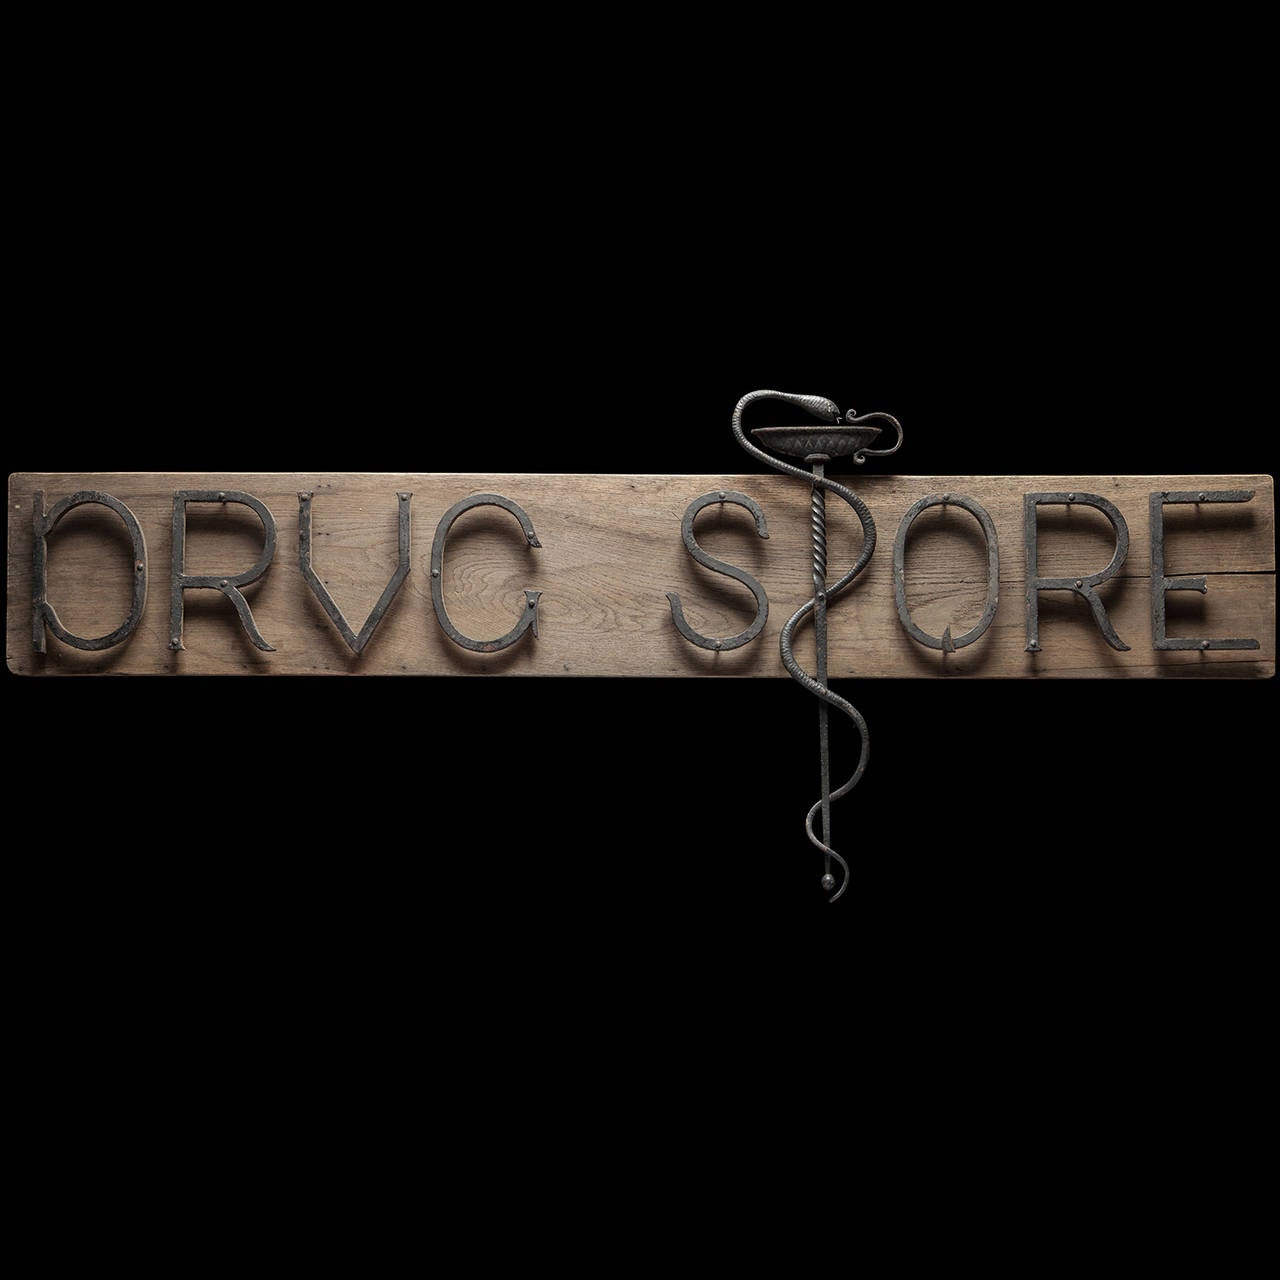 Solid steel letters on an oak board. The serpentine “S” represents the Rod of Asclepius; a common symbol used by medical organizations.